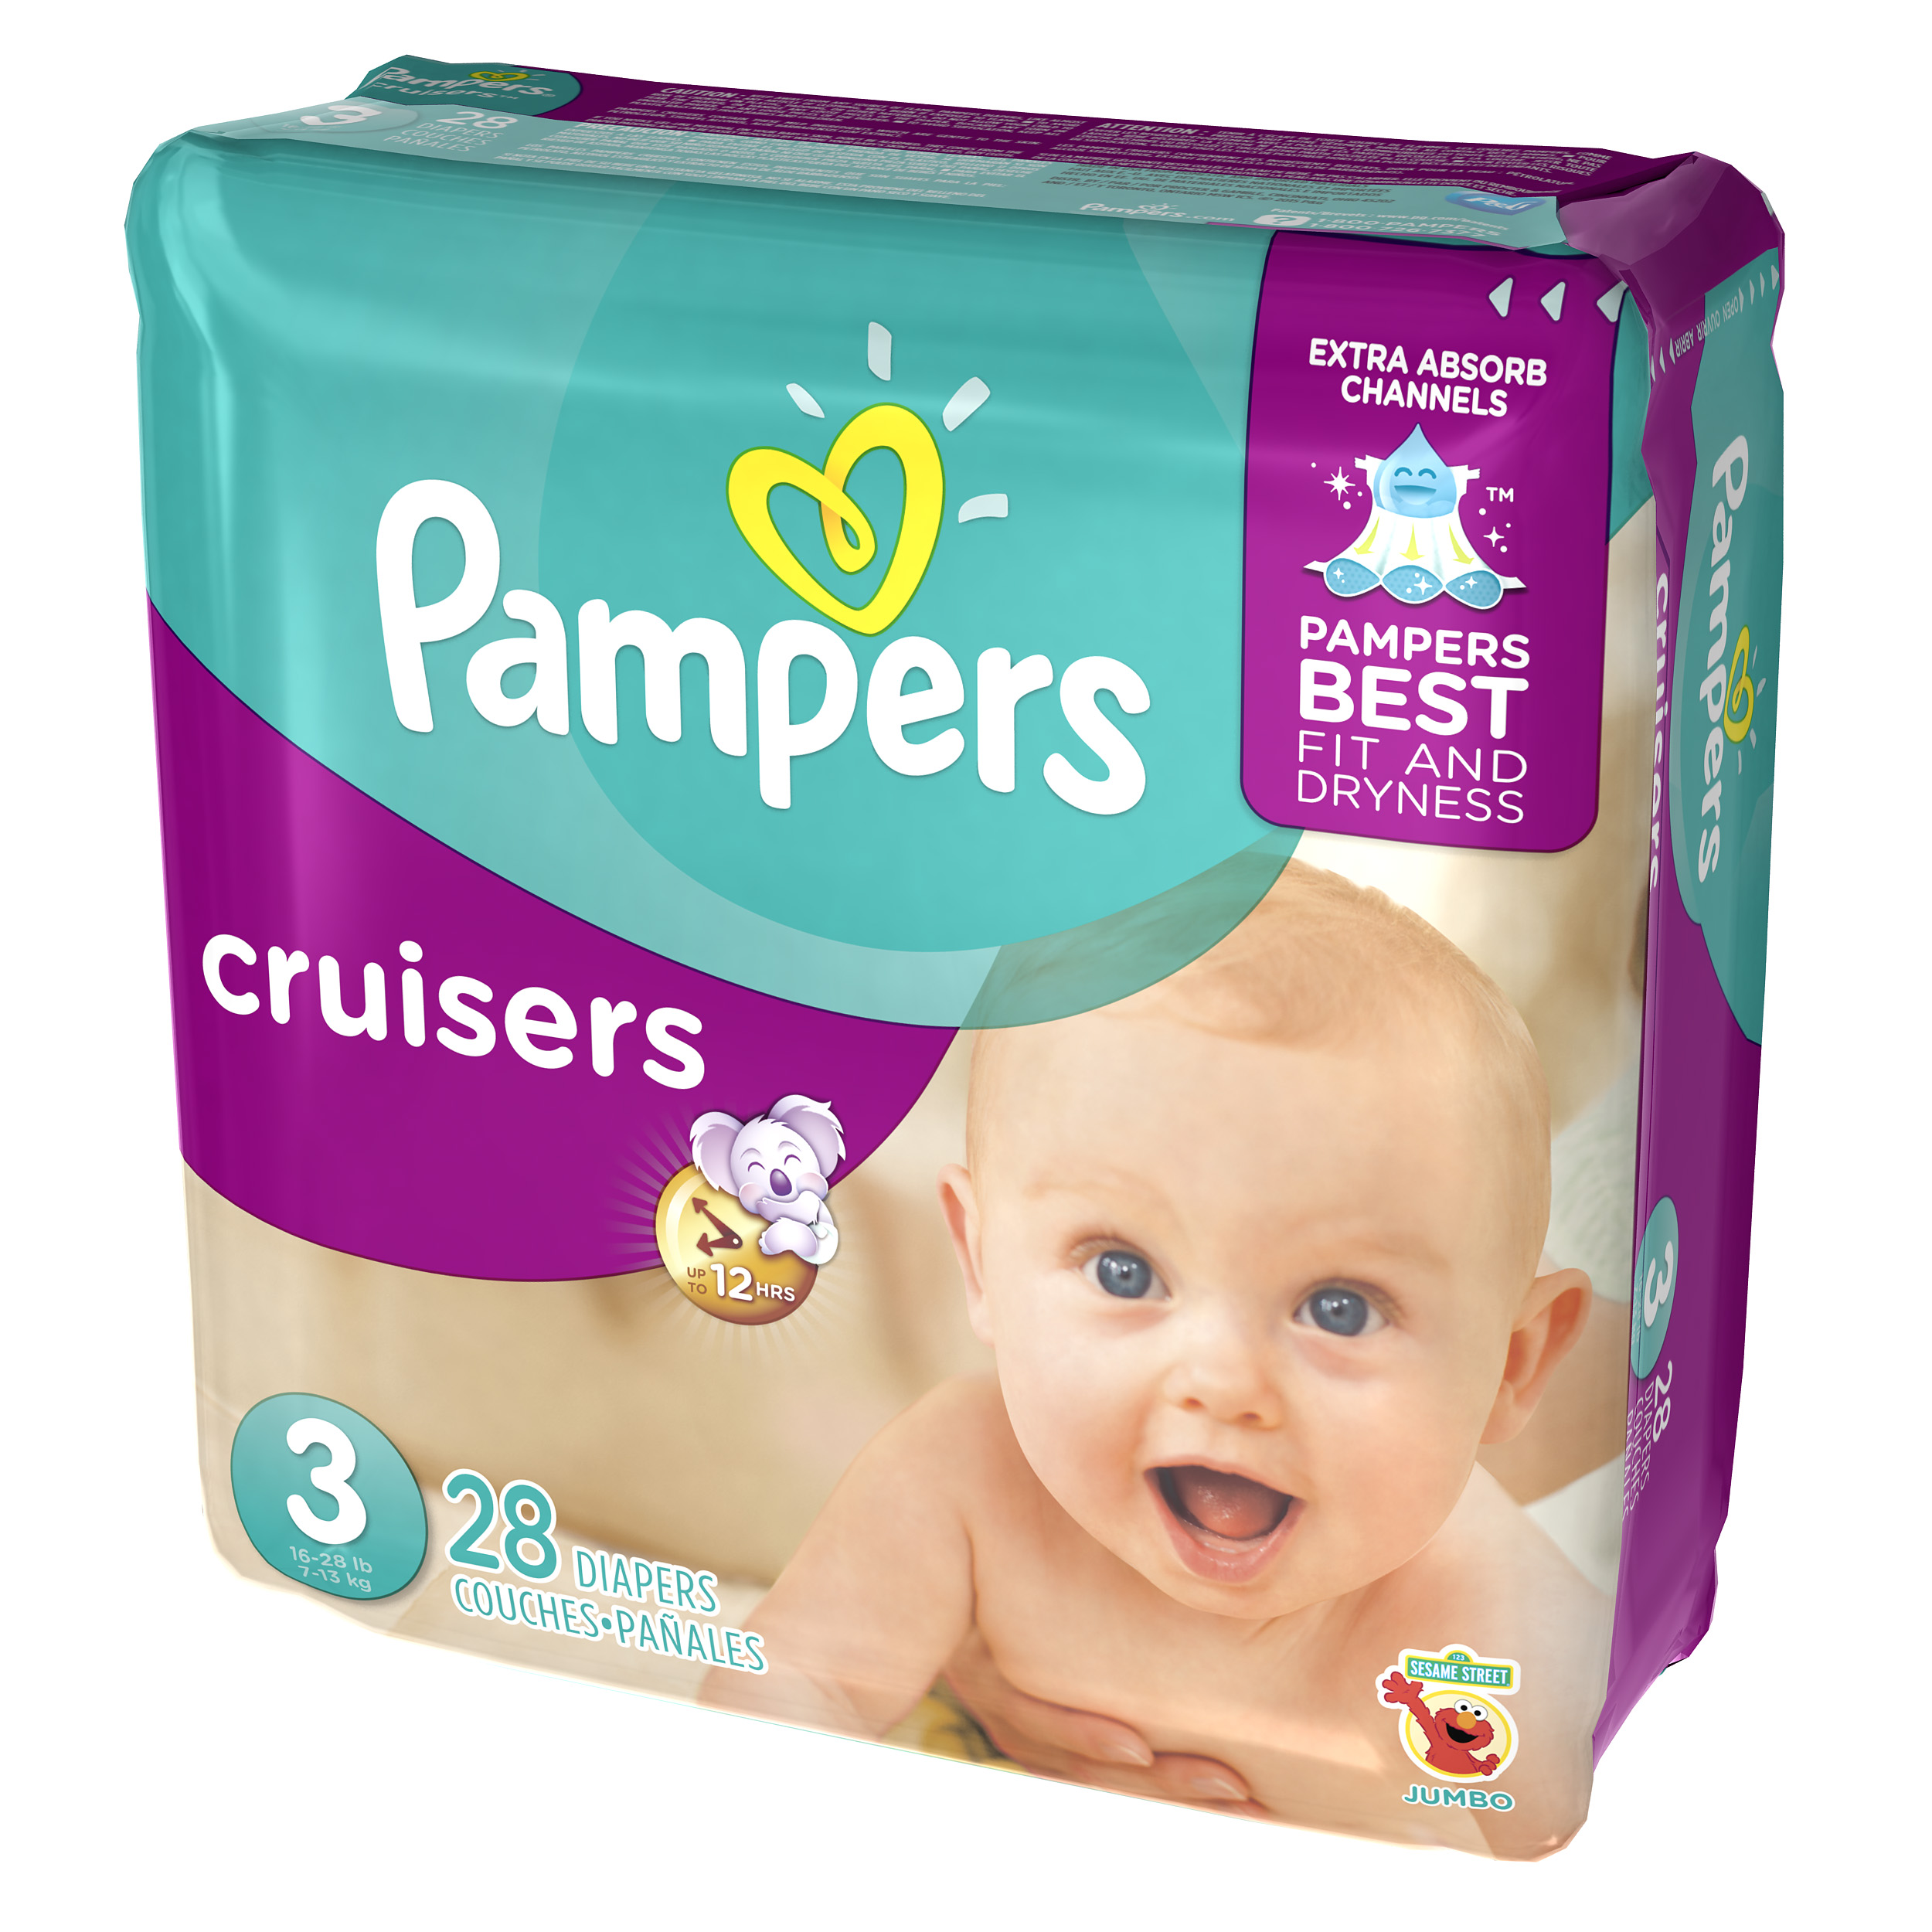 Pampers Cruisers Diapers Size 3 28 count - image 1 of 9